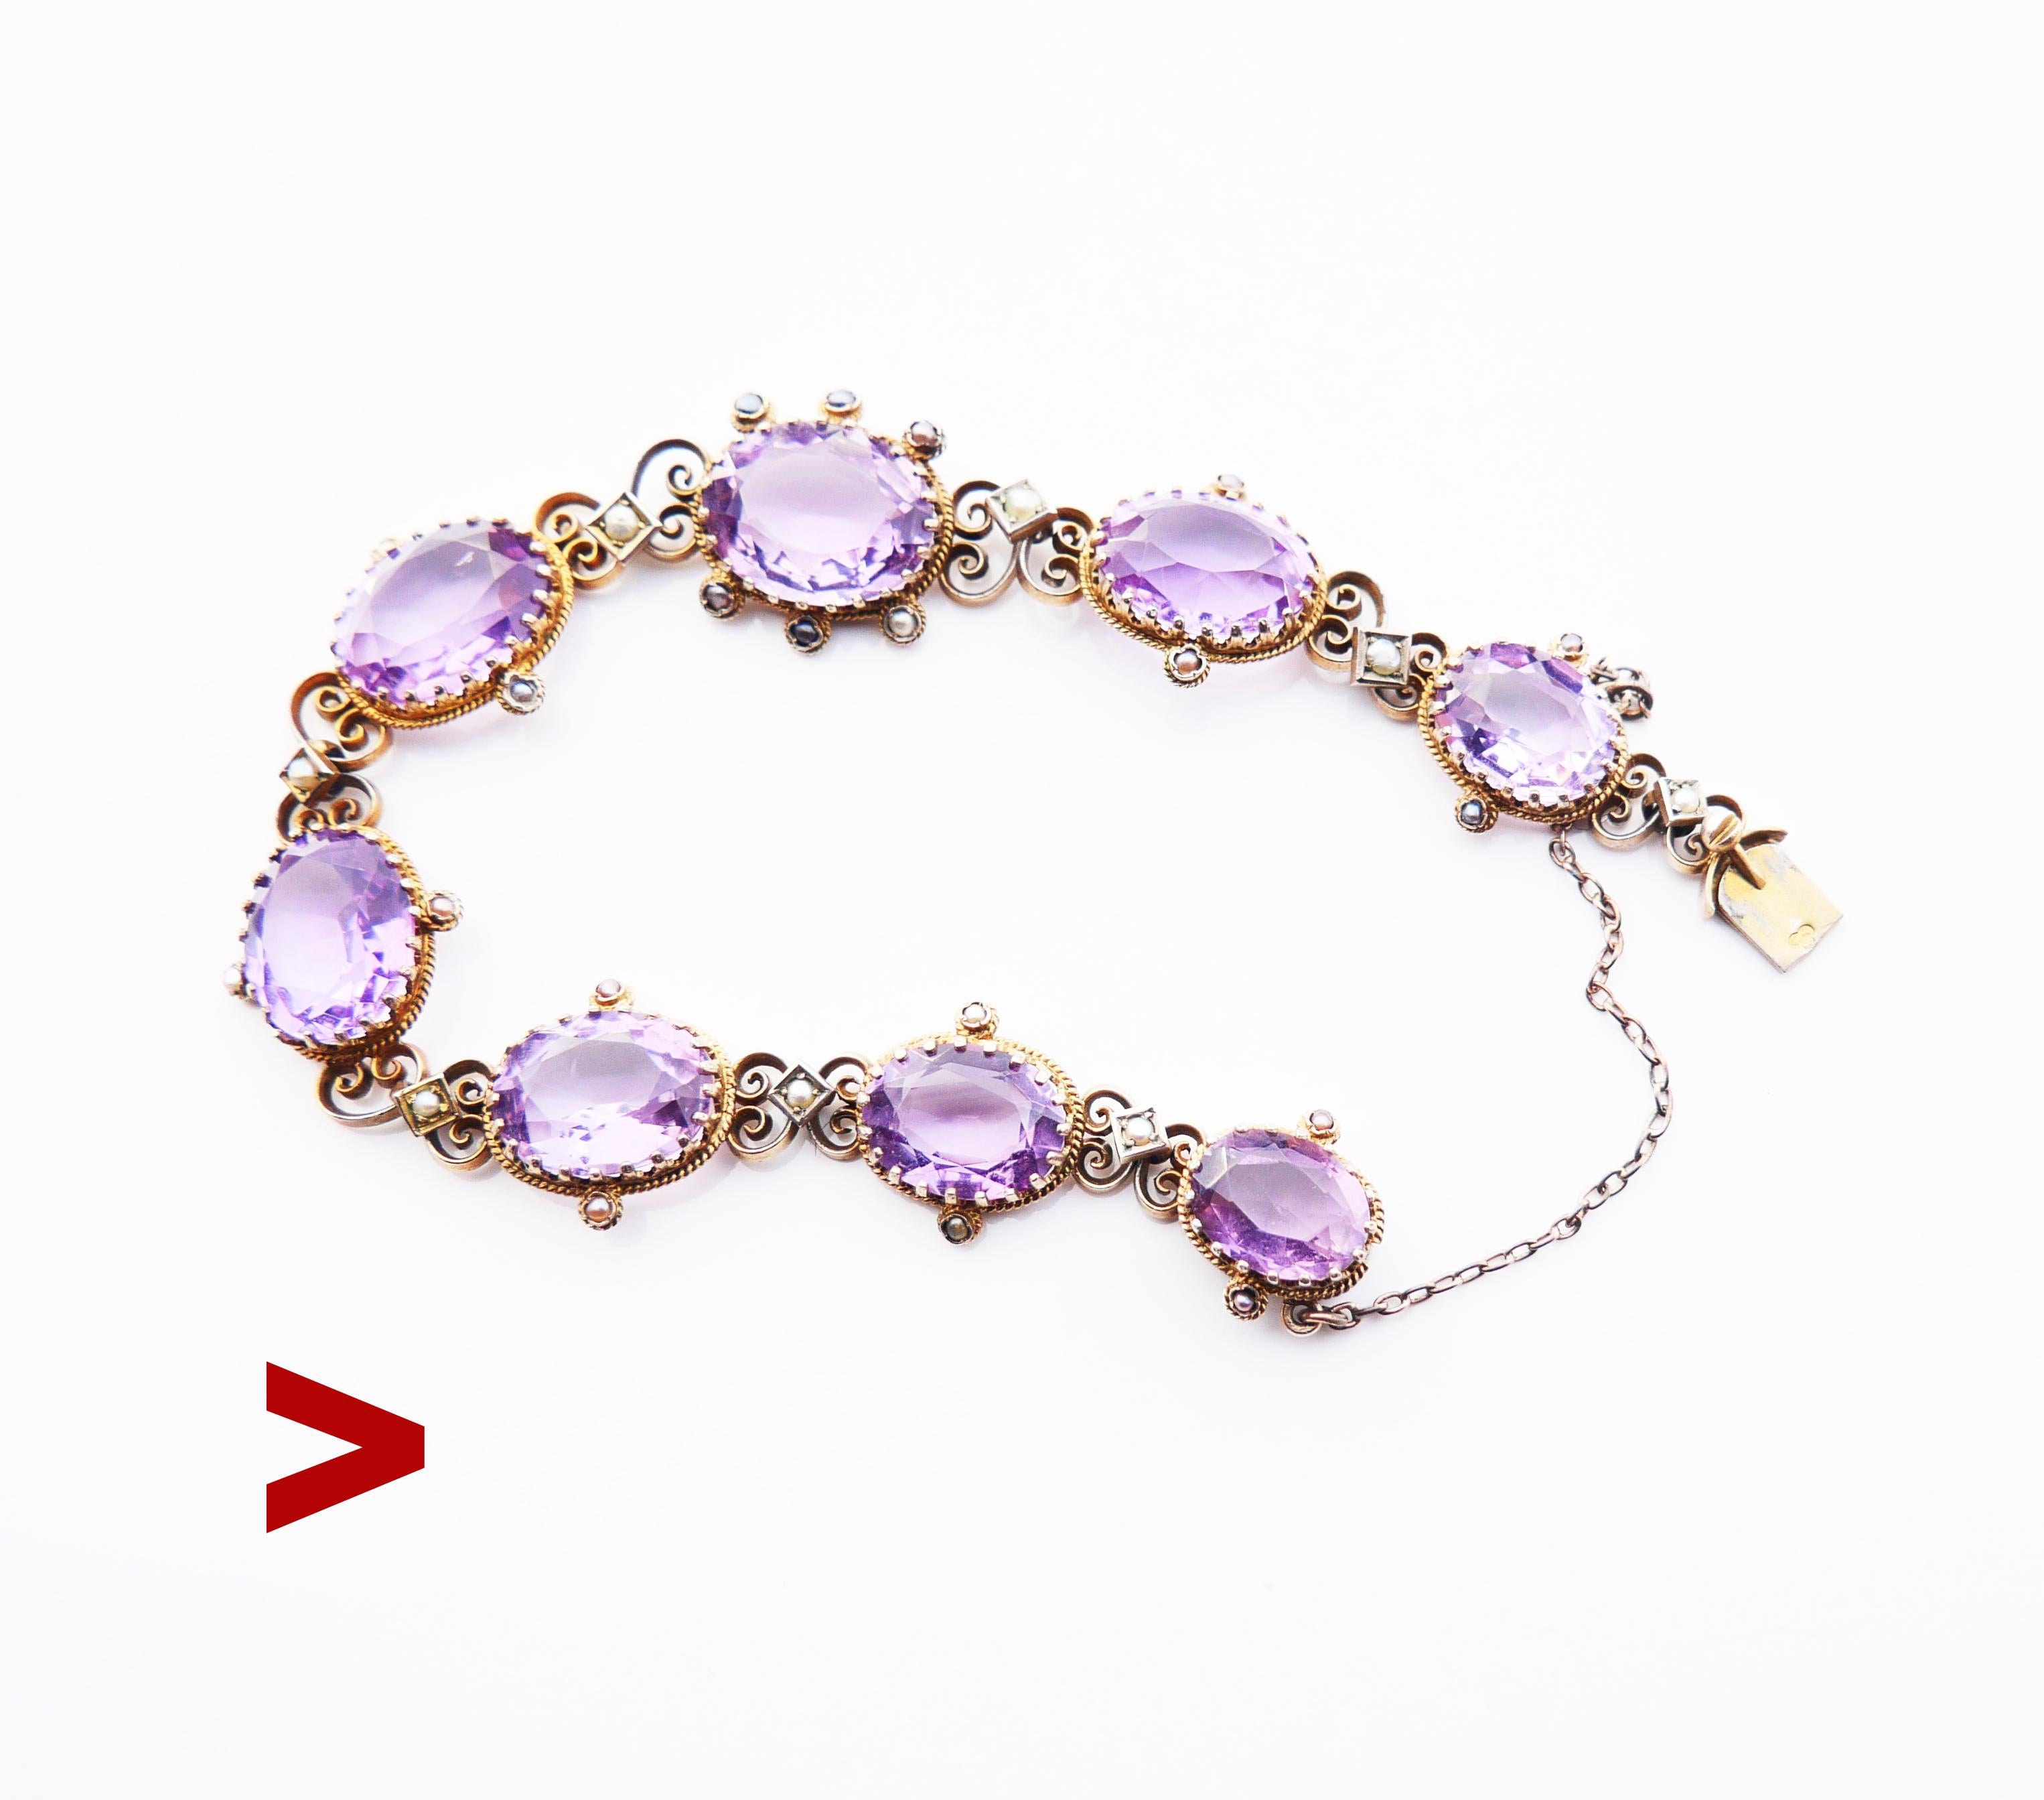 
European bracelet of the finest quality. Ten oval-cut natural Amethyst stones accented with Seed Pearls (some with metallic luster) framed and chained in solid Gold - filled Silver. Neat claw settings. Set of Swedish hallmarks, 830, maker's